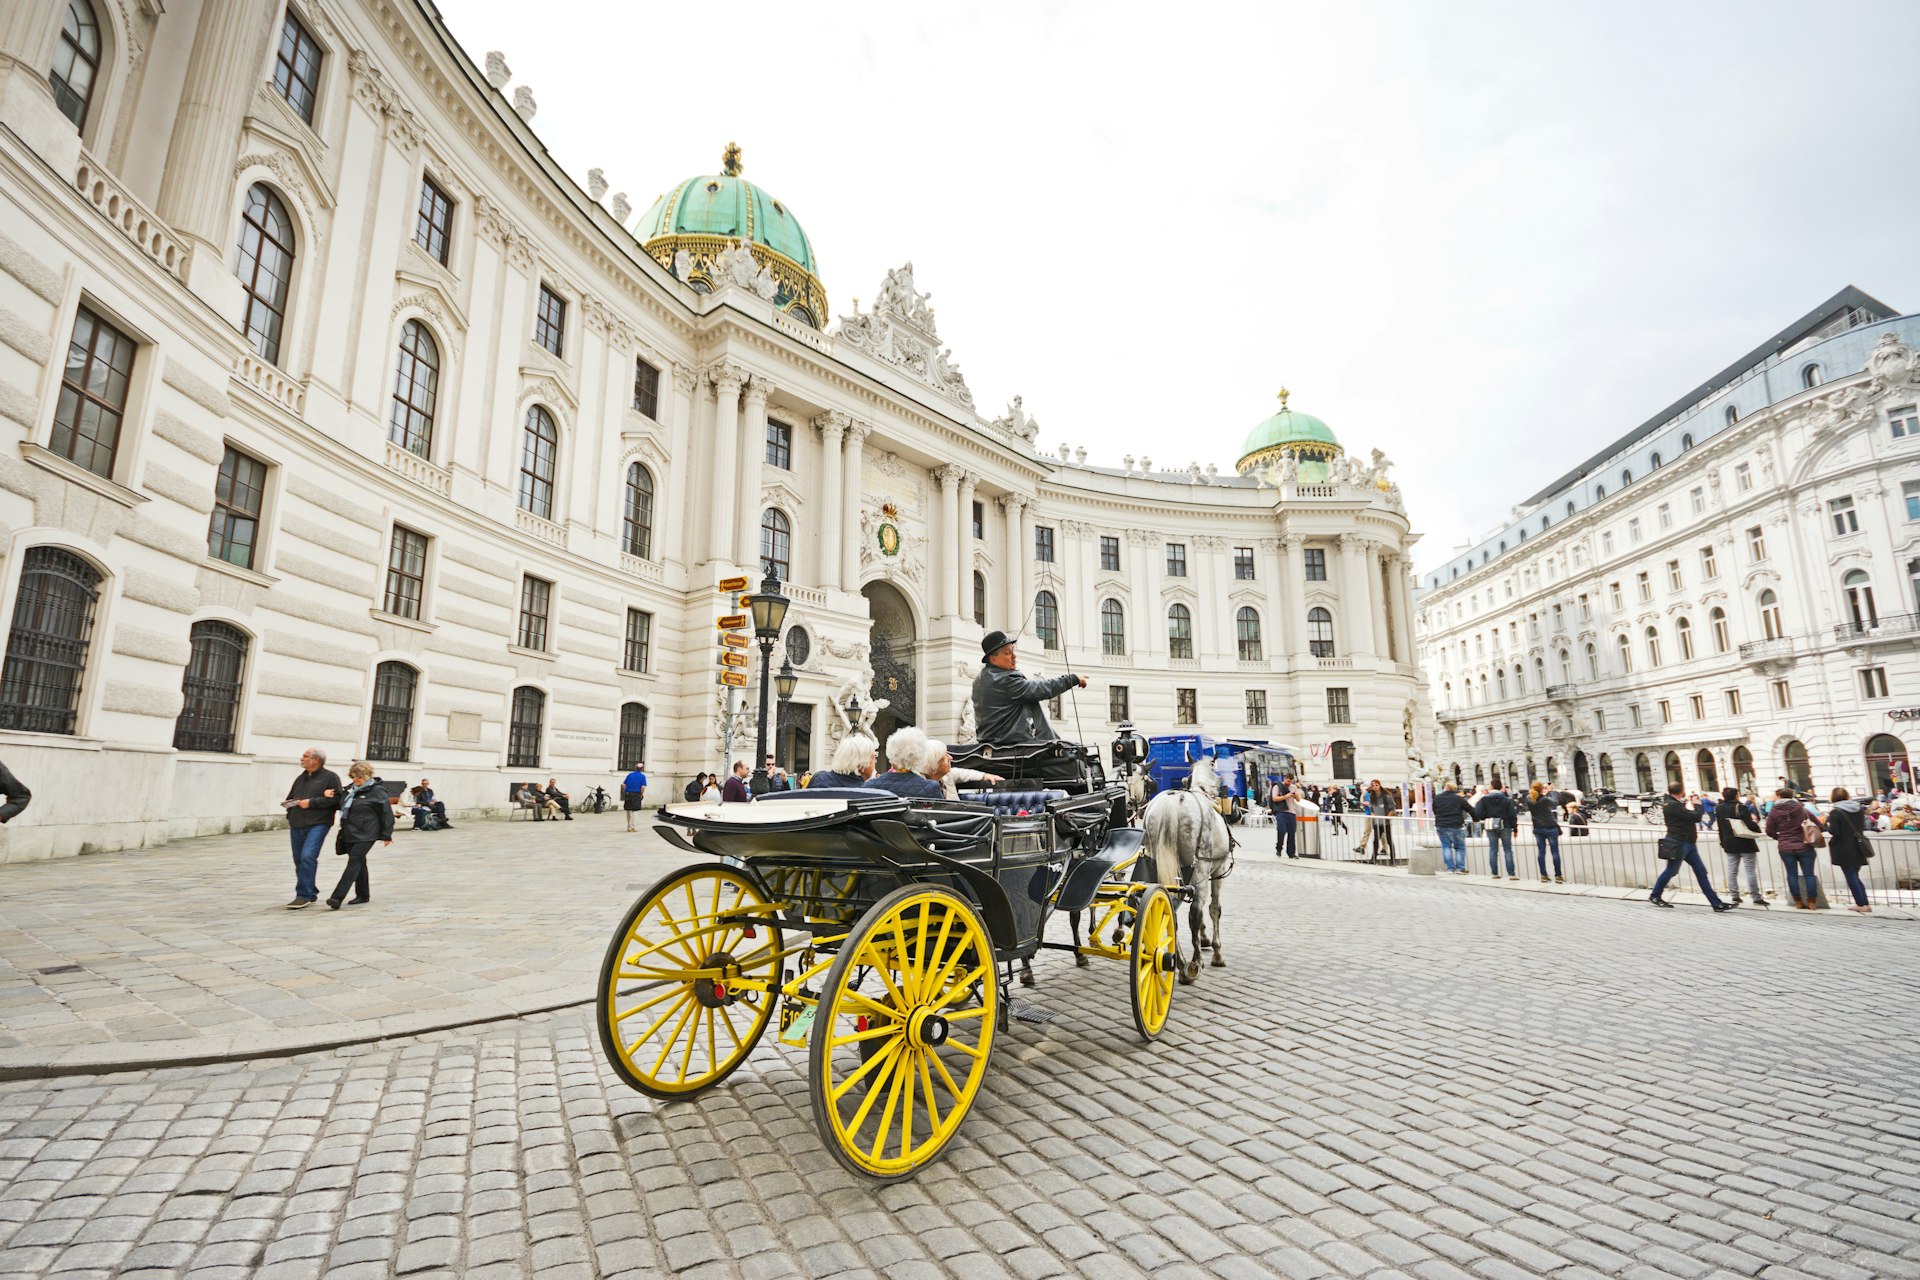 A horse-drawn carriage called fiaker with coachman passing by the Hofburg palace at Michaelerplatz, Vienna, Austria